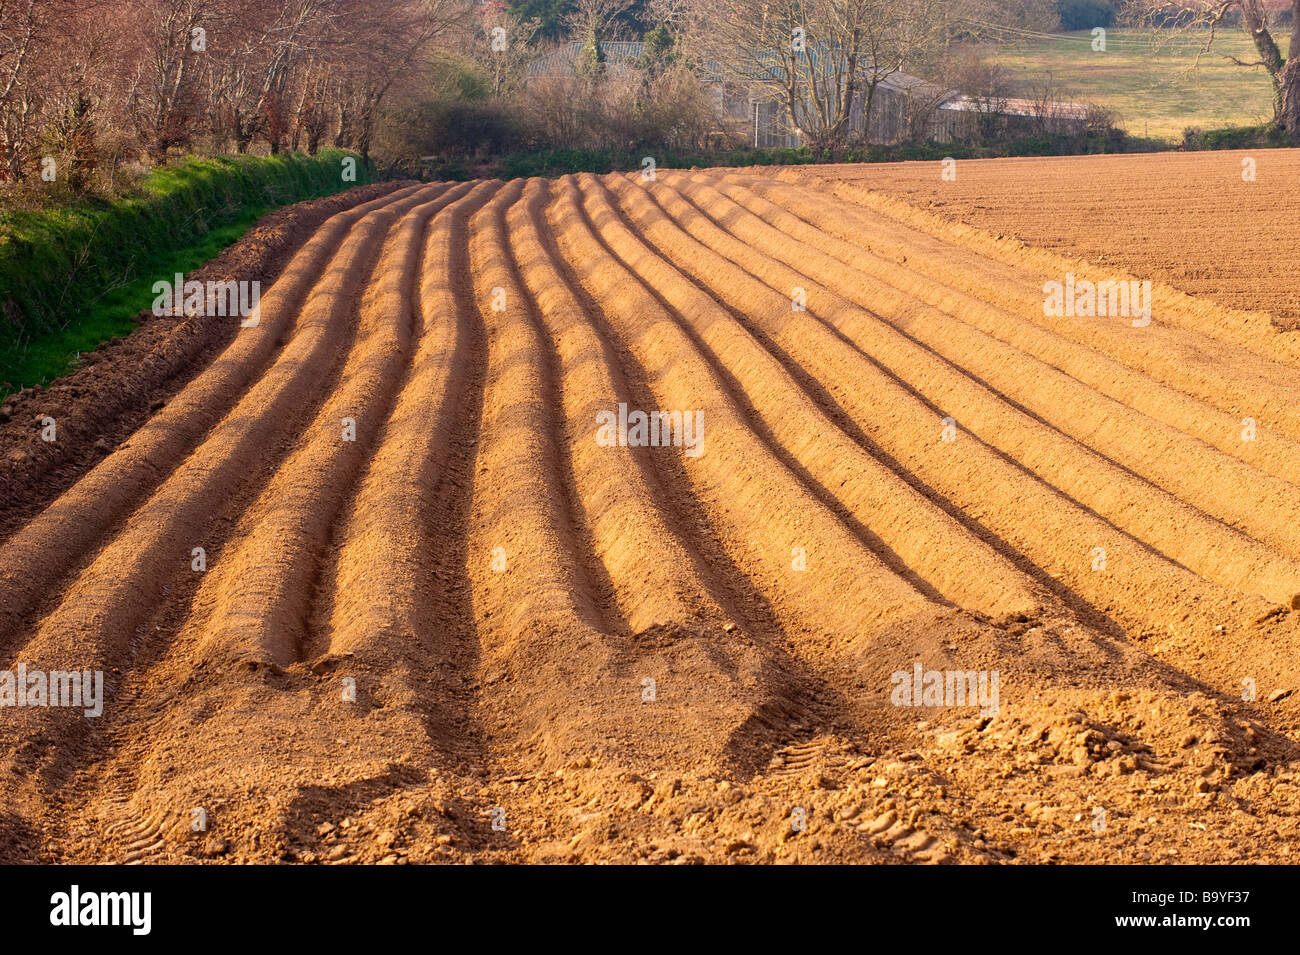 Deeply furrowed ploughed field. UK 2009 Stock Photo